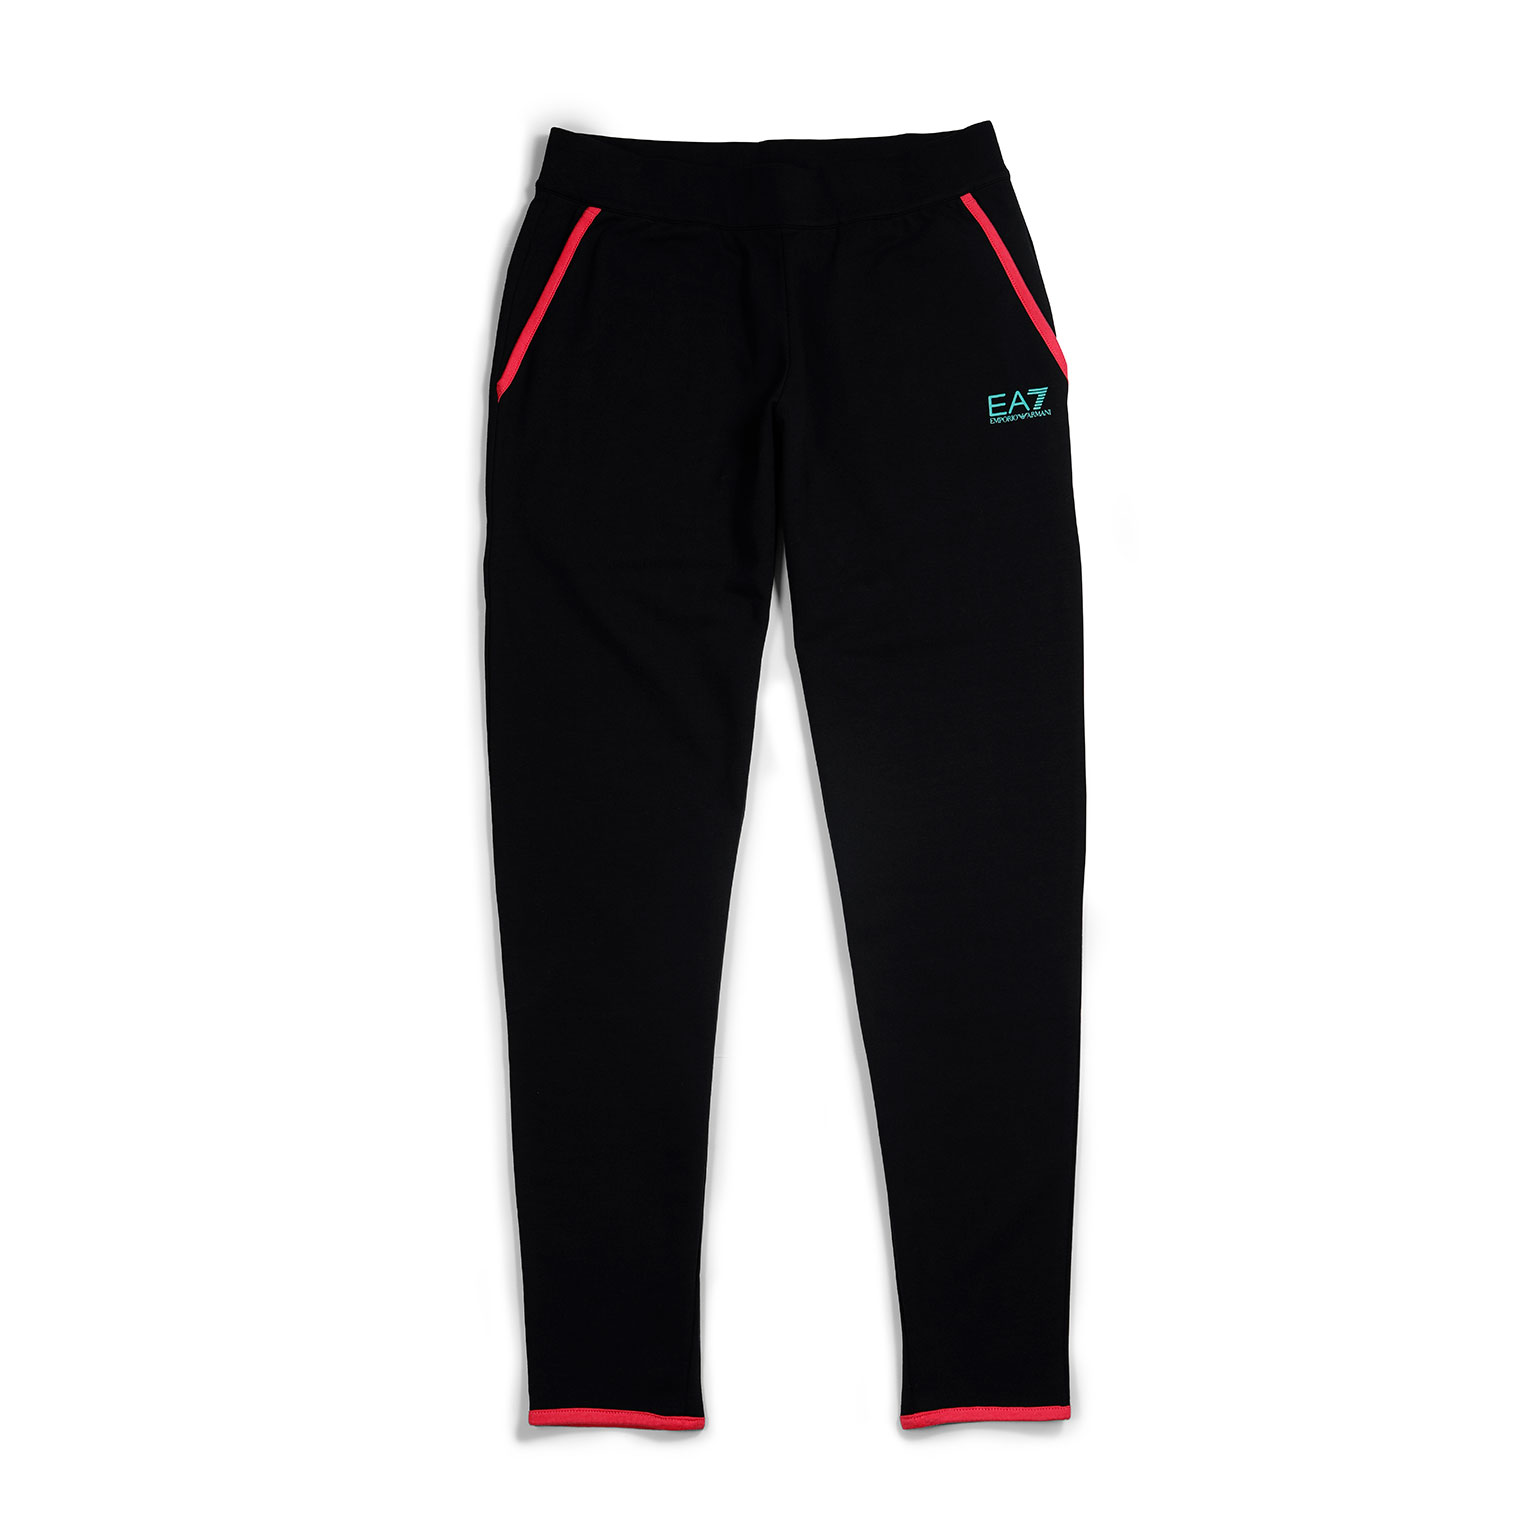 Tracksuit Bottom · Available at Los Angeles International Airport (LAX)